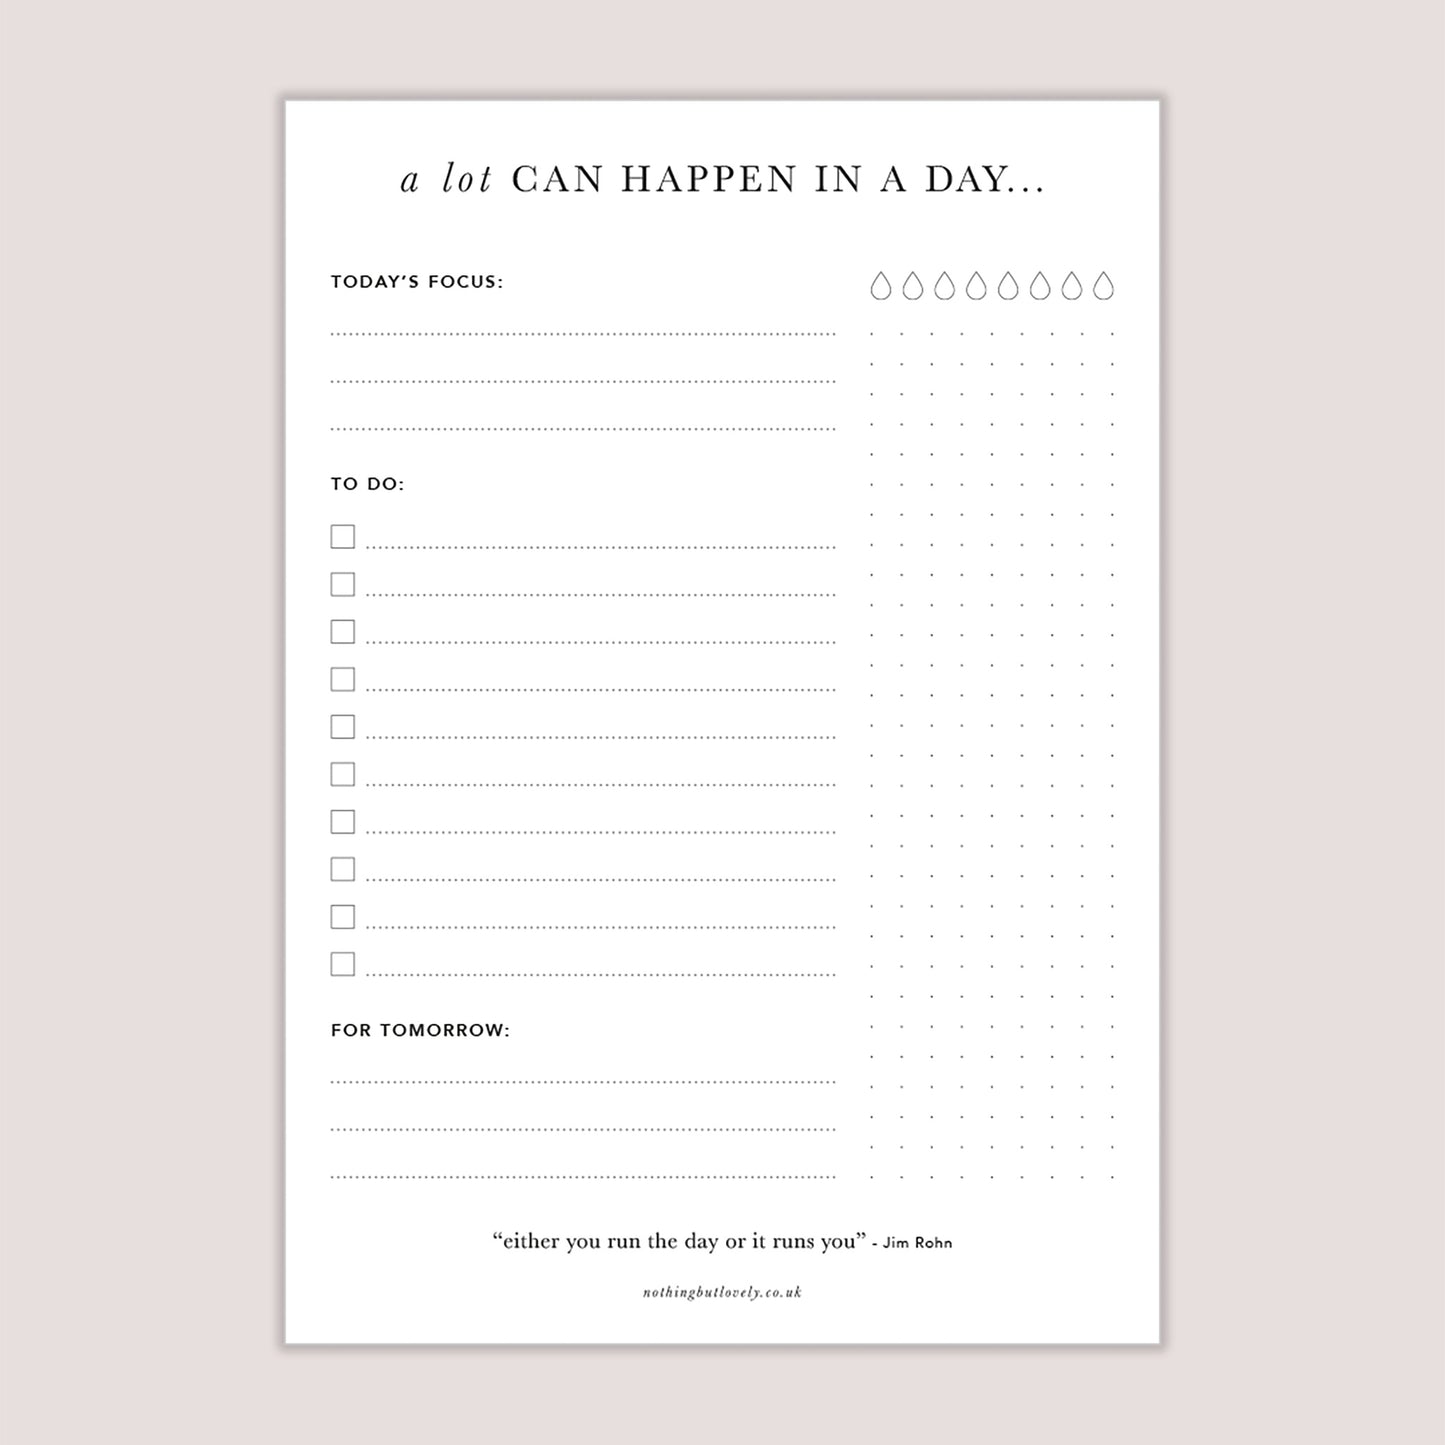 daily planner pad, space to fill in your focus for the day, your to do list, things to leave until tomorrow, water intake, dotted space for notes and a quote that reads "either you run the day or it runs you"